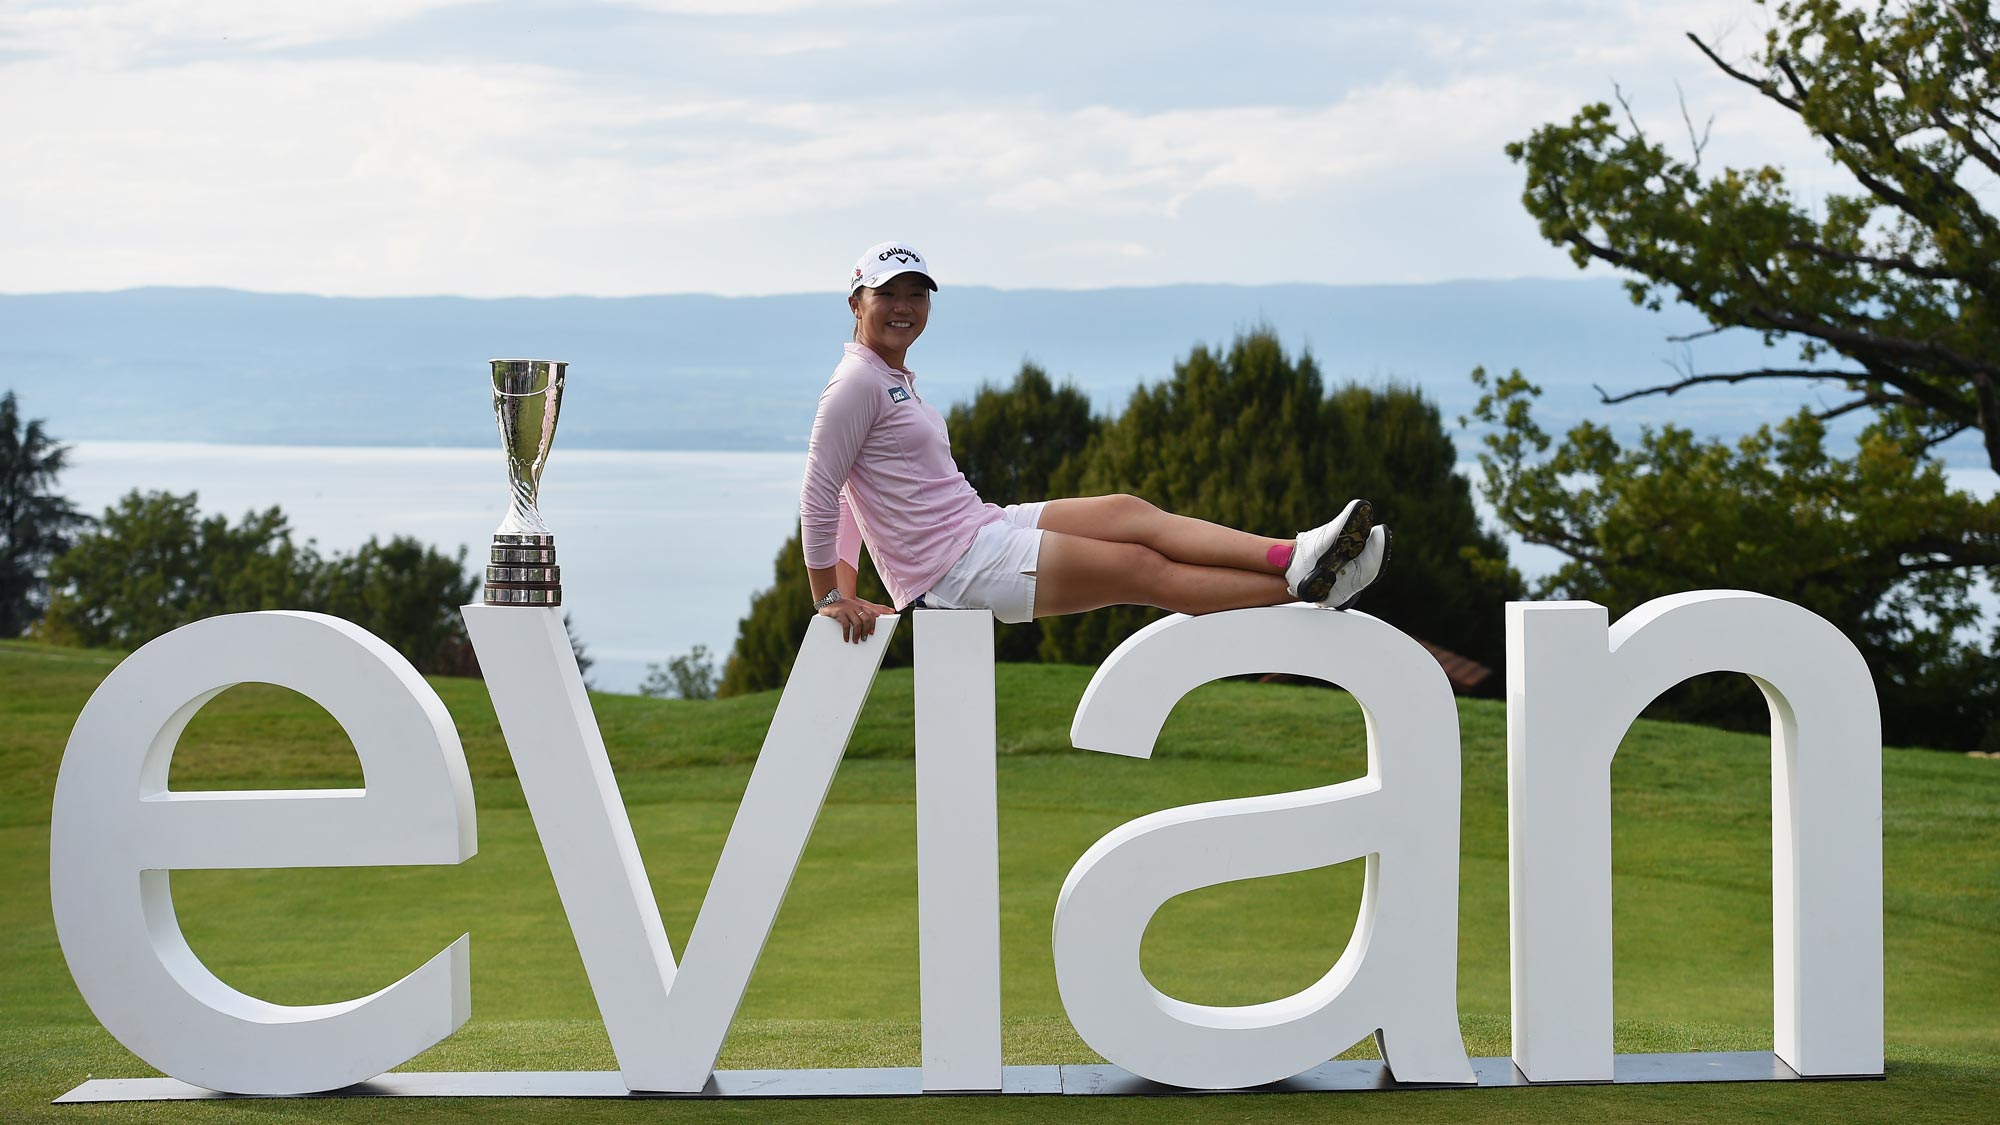 Lydia Ko poses with the giant Evian sign and her new Evian Championship Trophy after winning her first career major